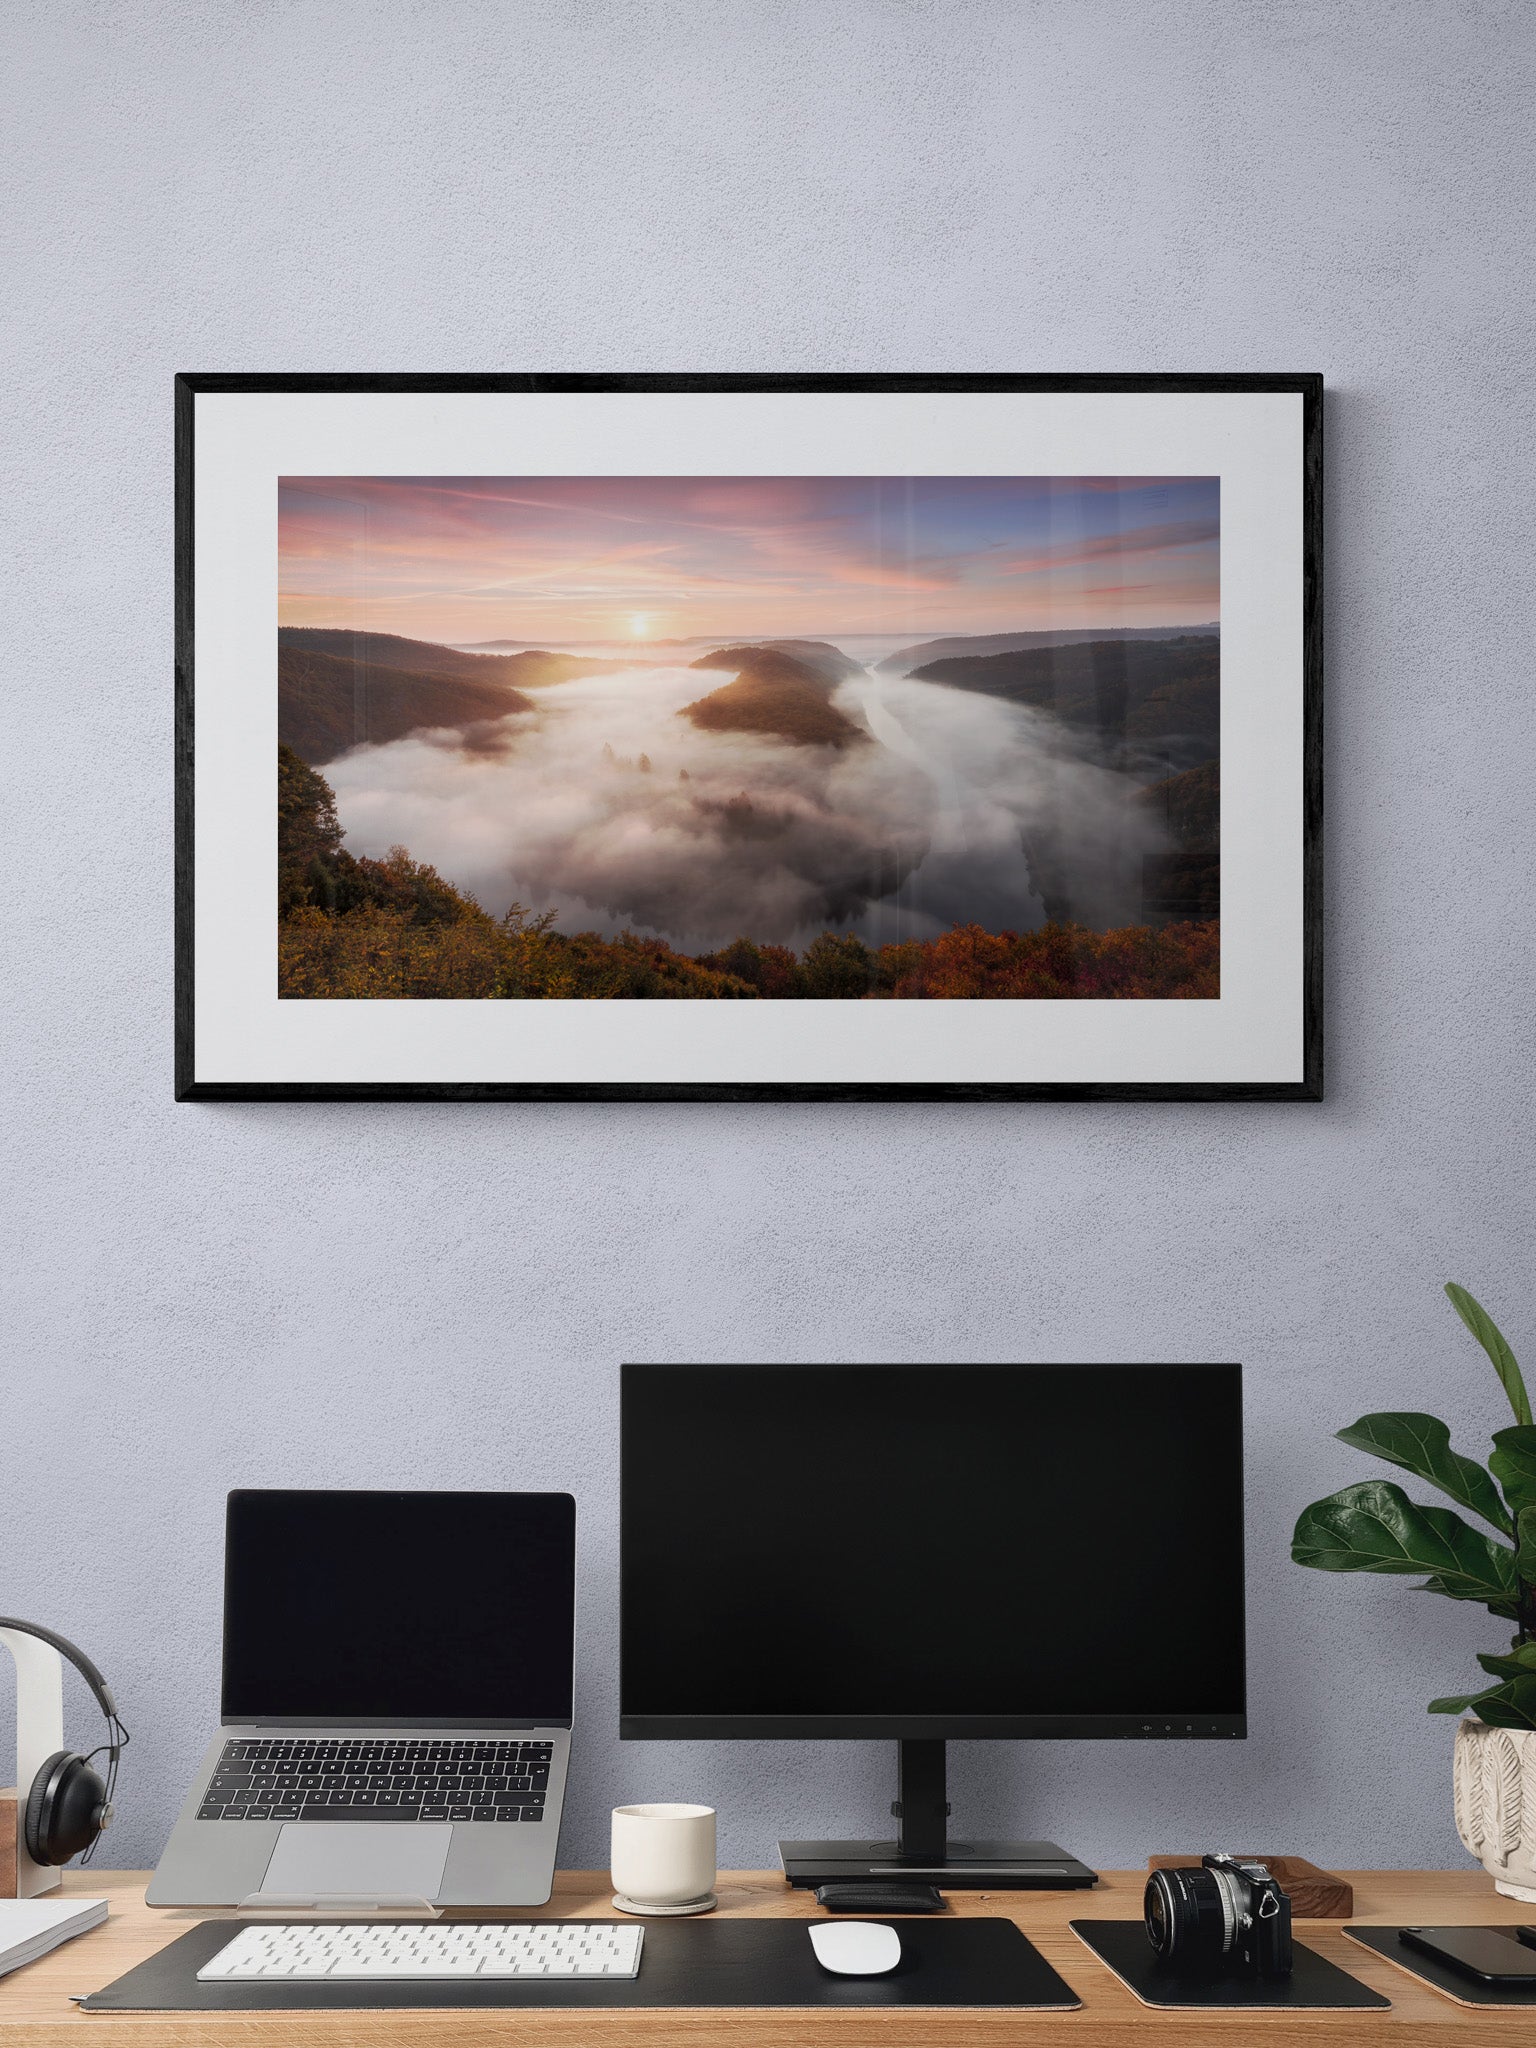 Image Title: The foggy Loop Photographer: Marcus Danz Location: Mettlach, Germany Image description: Mysterious morning fog drifts silently through Mettlach’s Saar loop, partly lit by the warm light of the rising sun. High quality Fine Art print up to 36 inch / around 90 centimeters on Hahnemühle paper available. Large variant over computer desk.